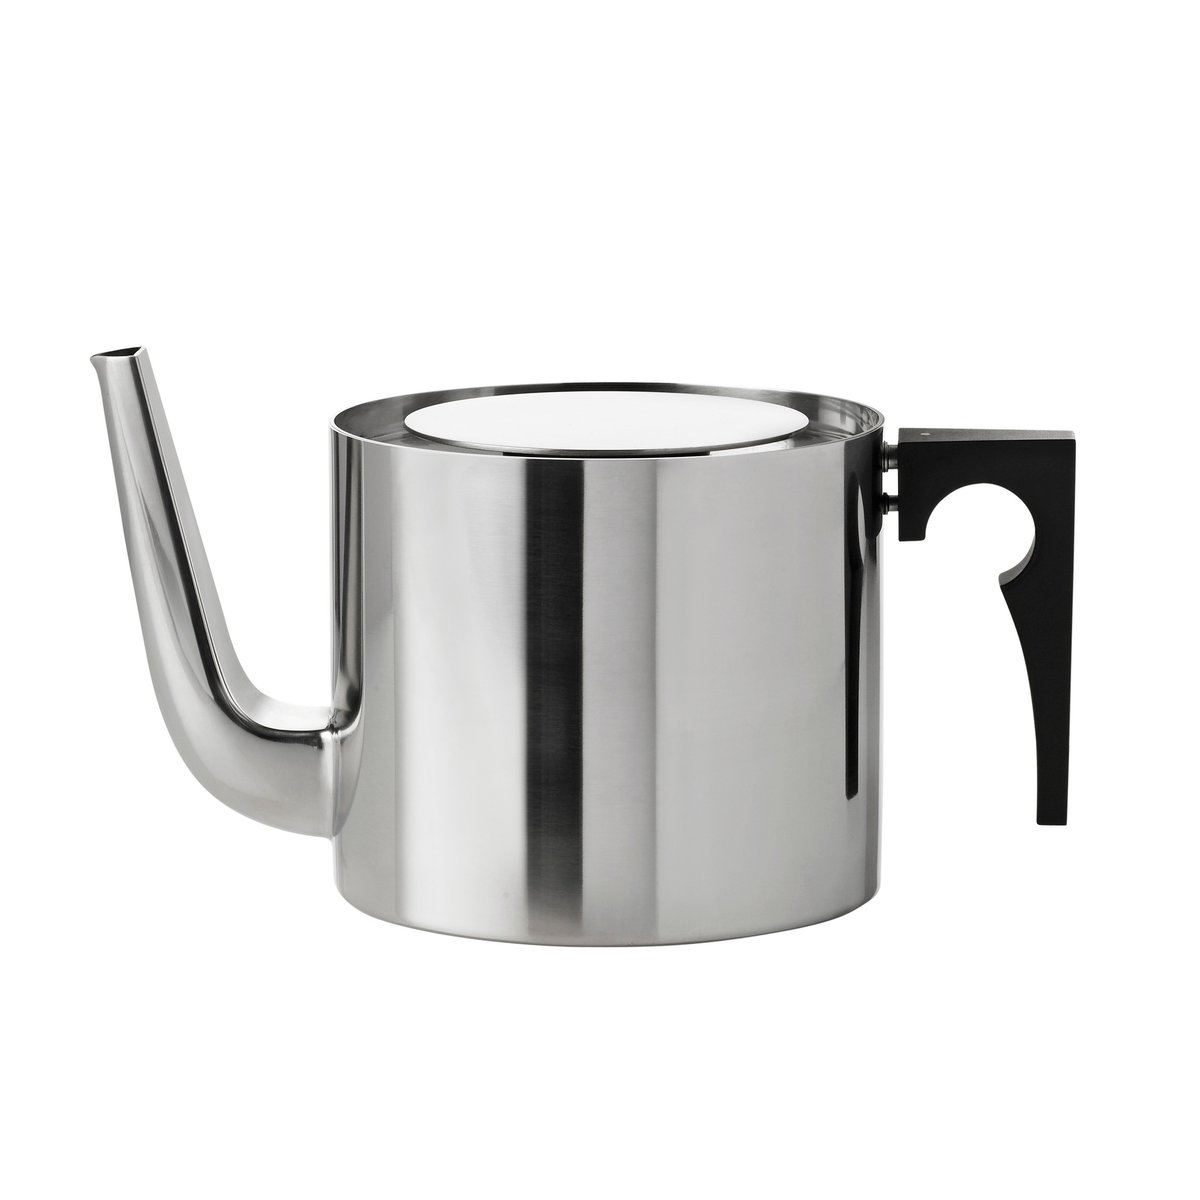 Stelton AJ cylinda-line theepot roestvrij staal